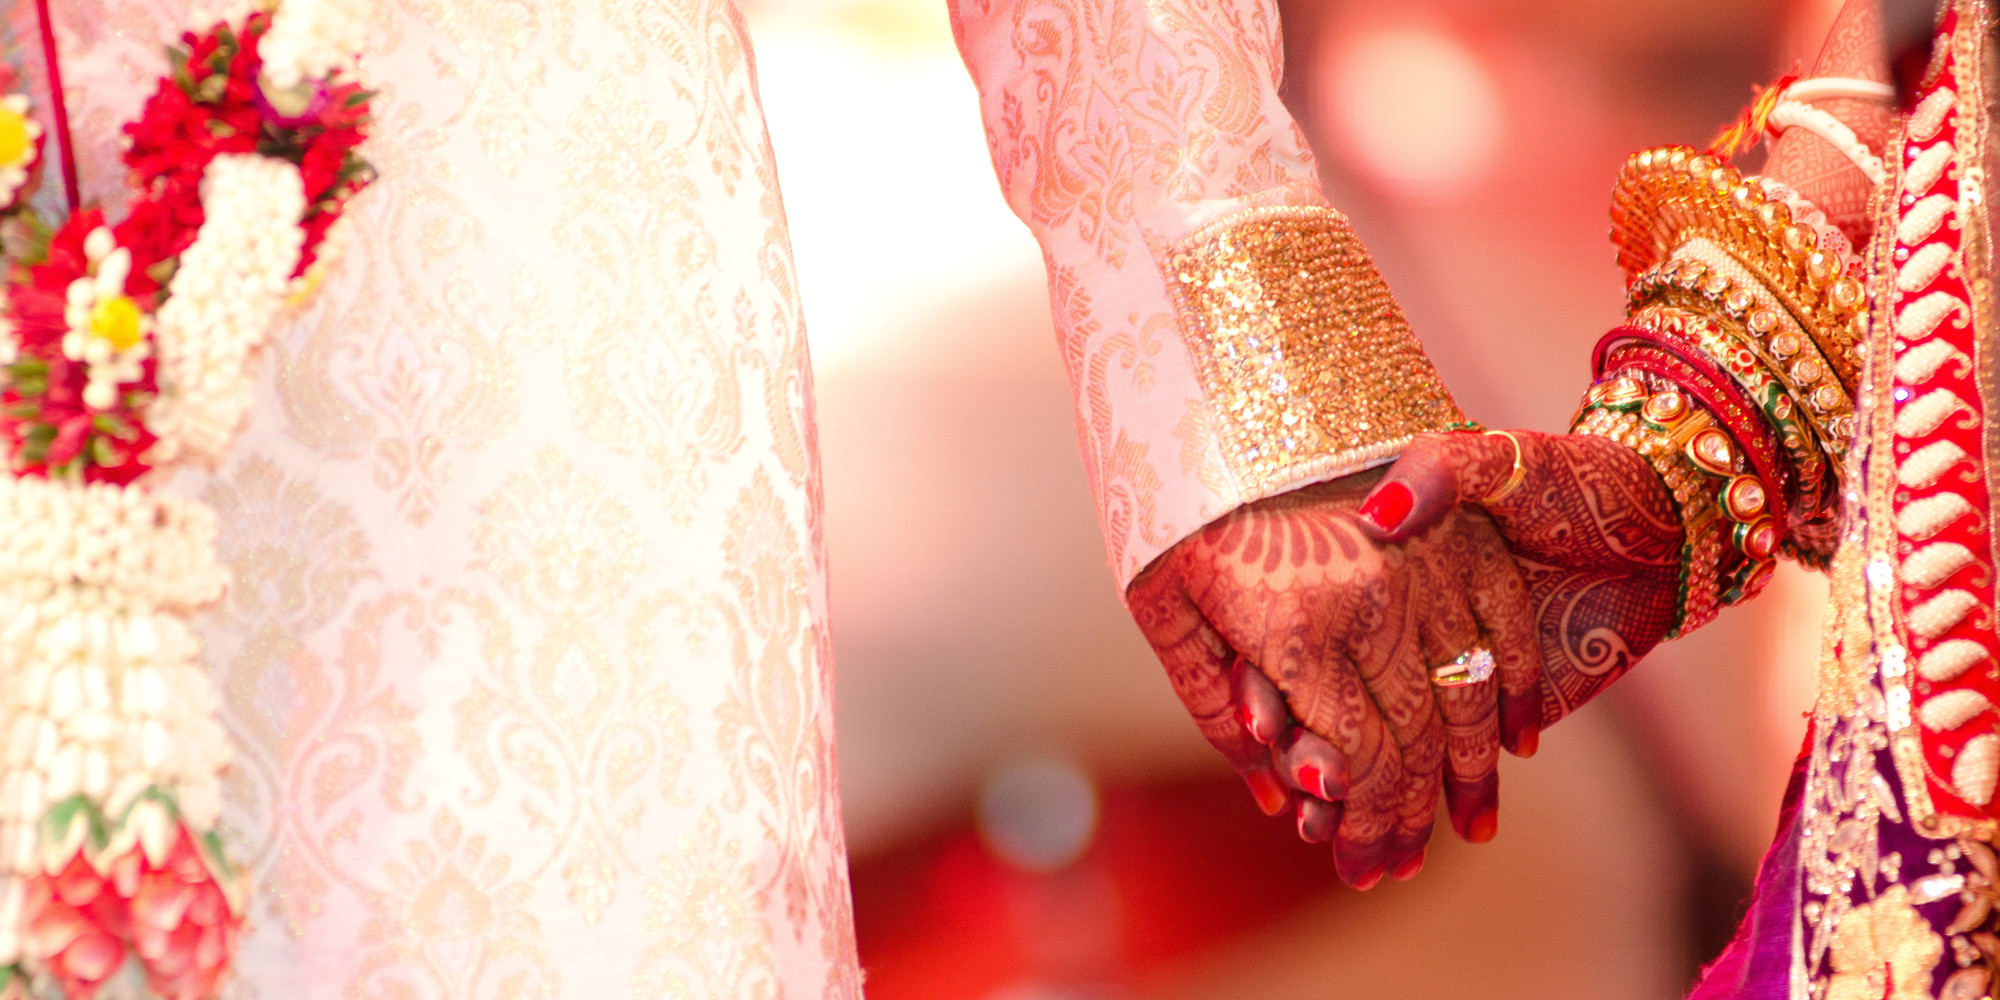 Married in India